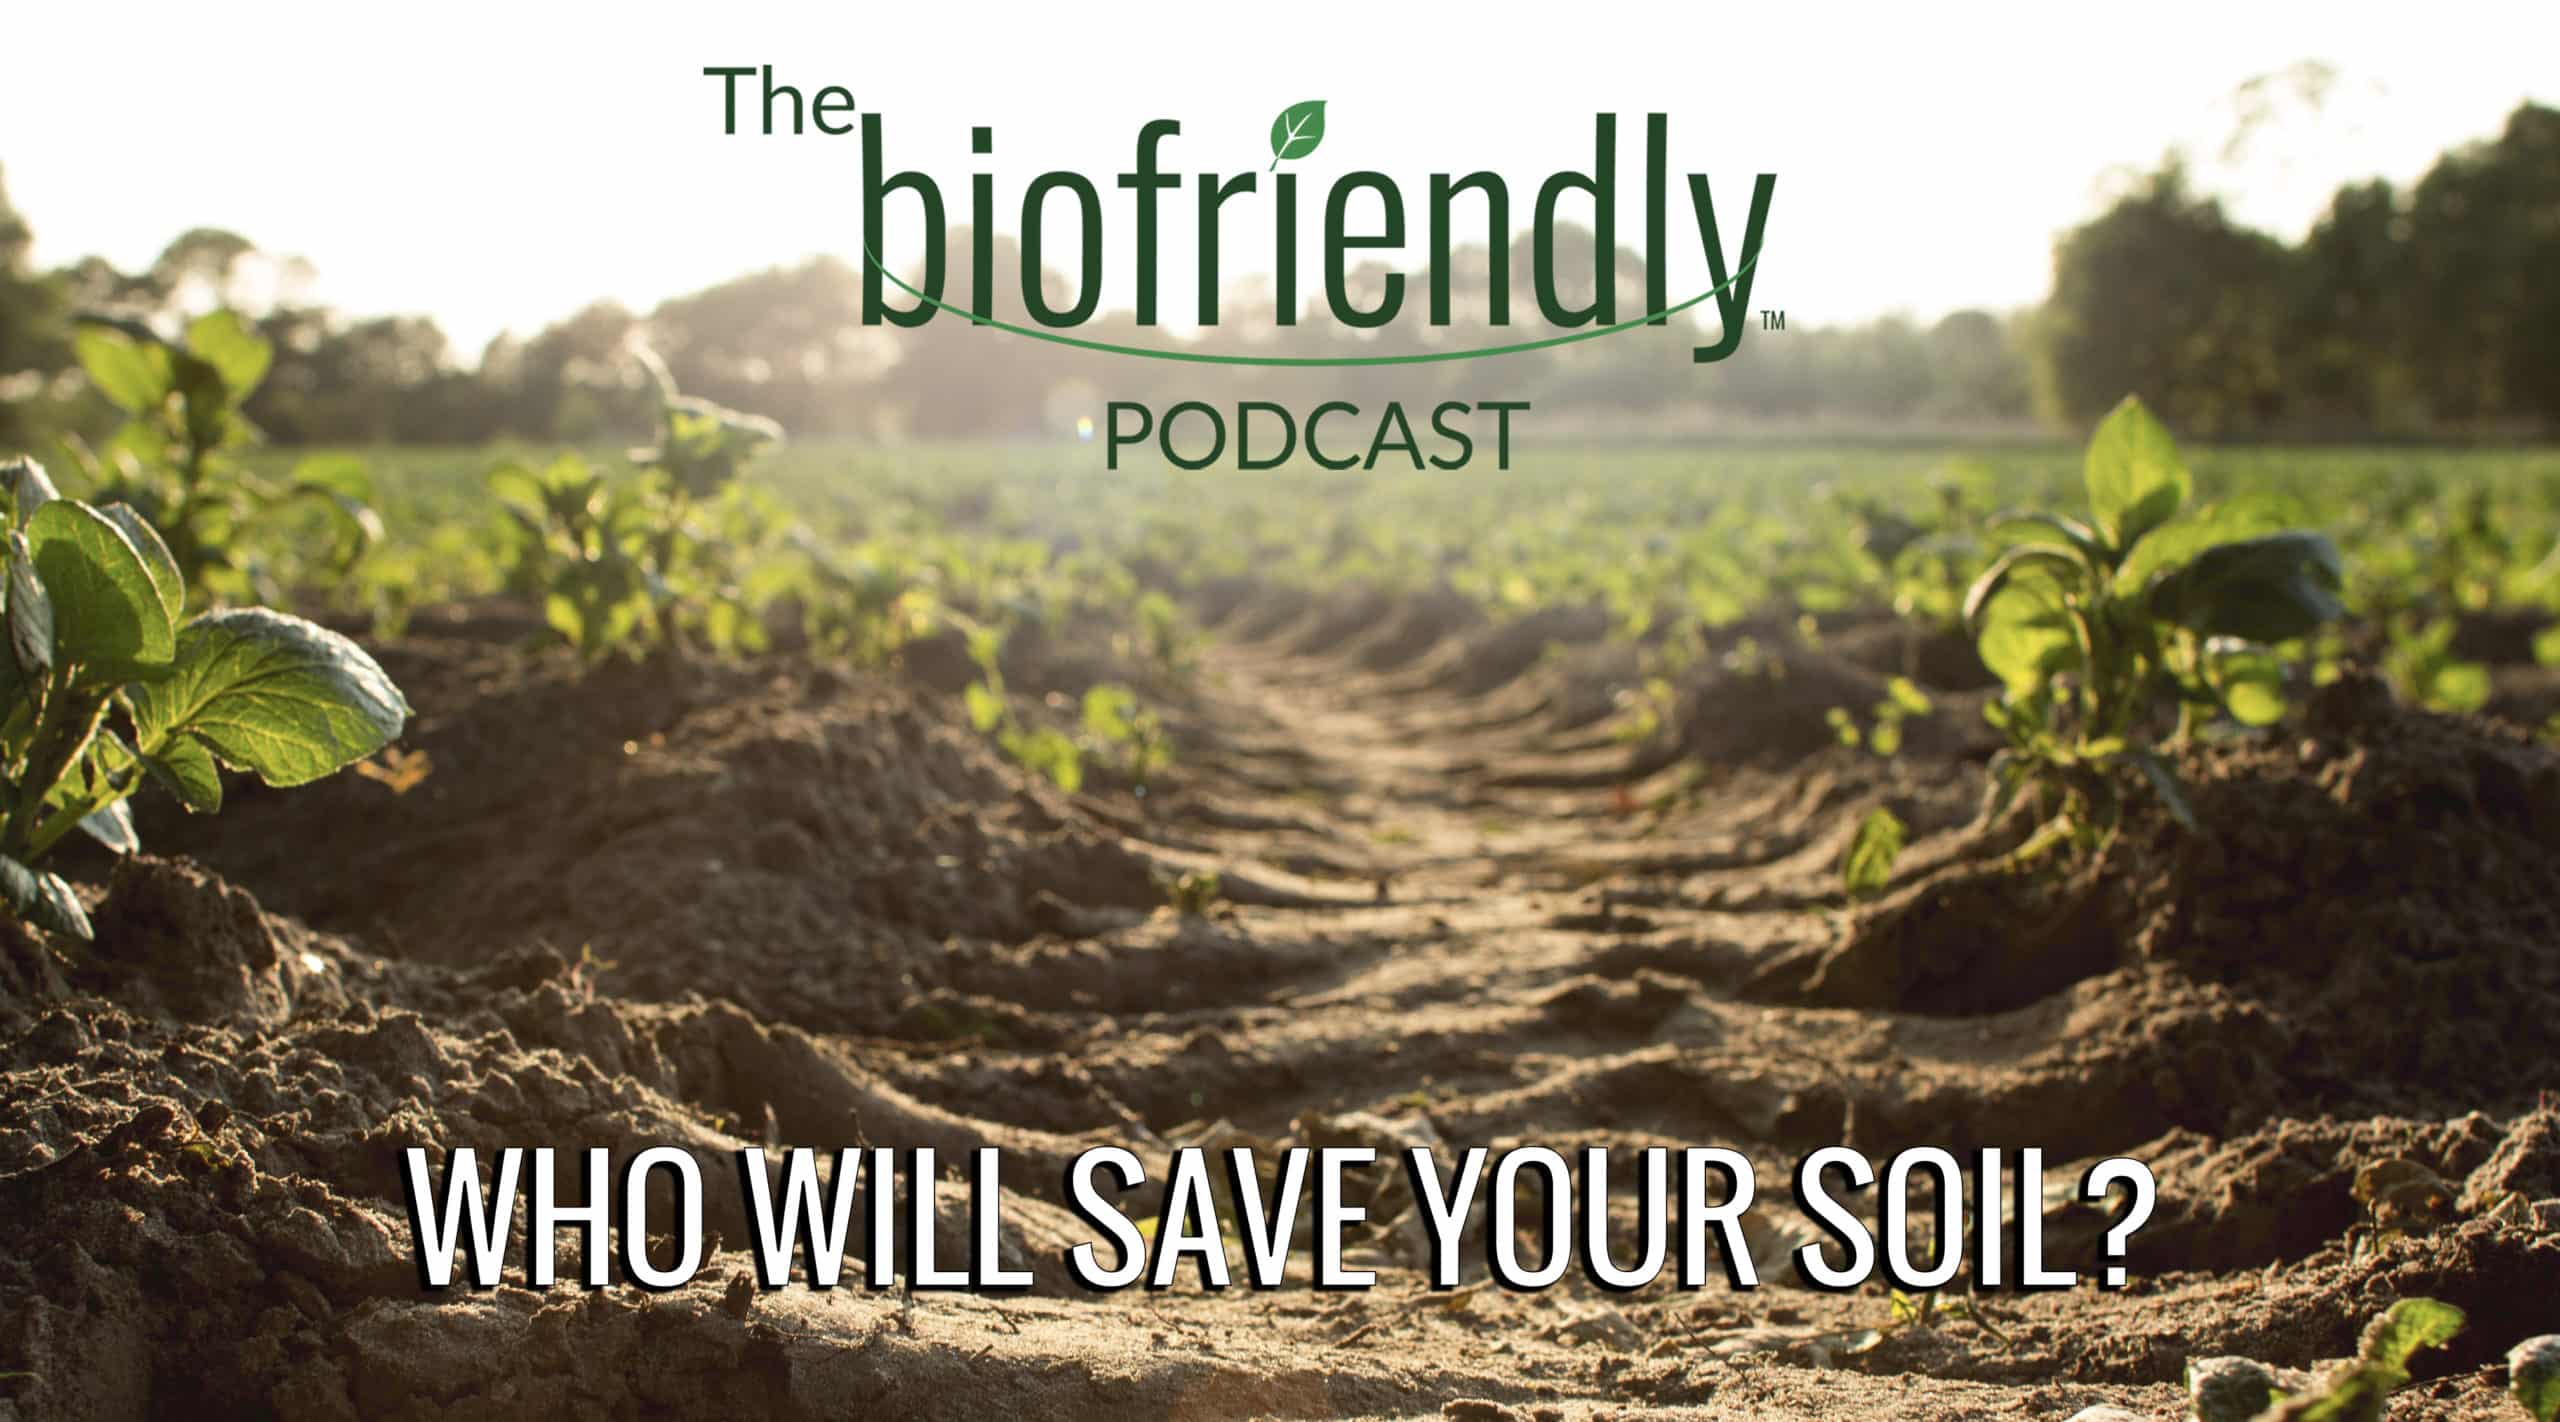 The Biofriendly Podcast - Episode 44 - Who Will Save Your Soil?